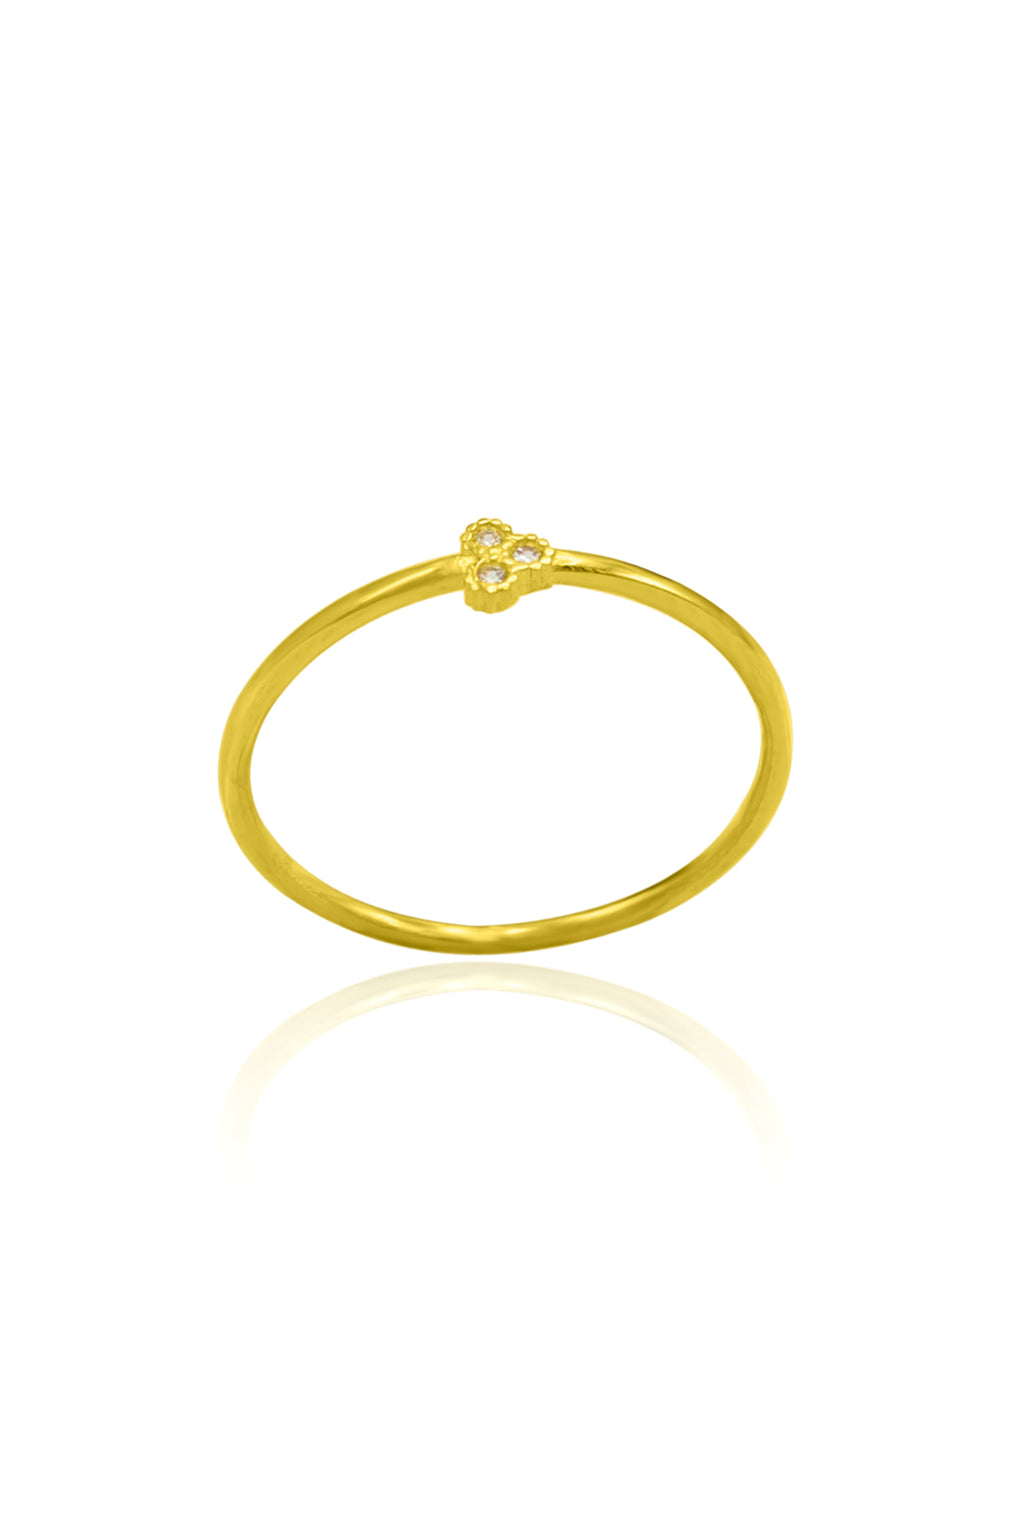 Round Model Gold Plated Silver Ring With Zircon (NG201020540)